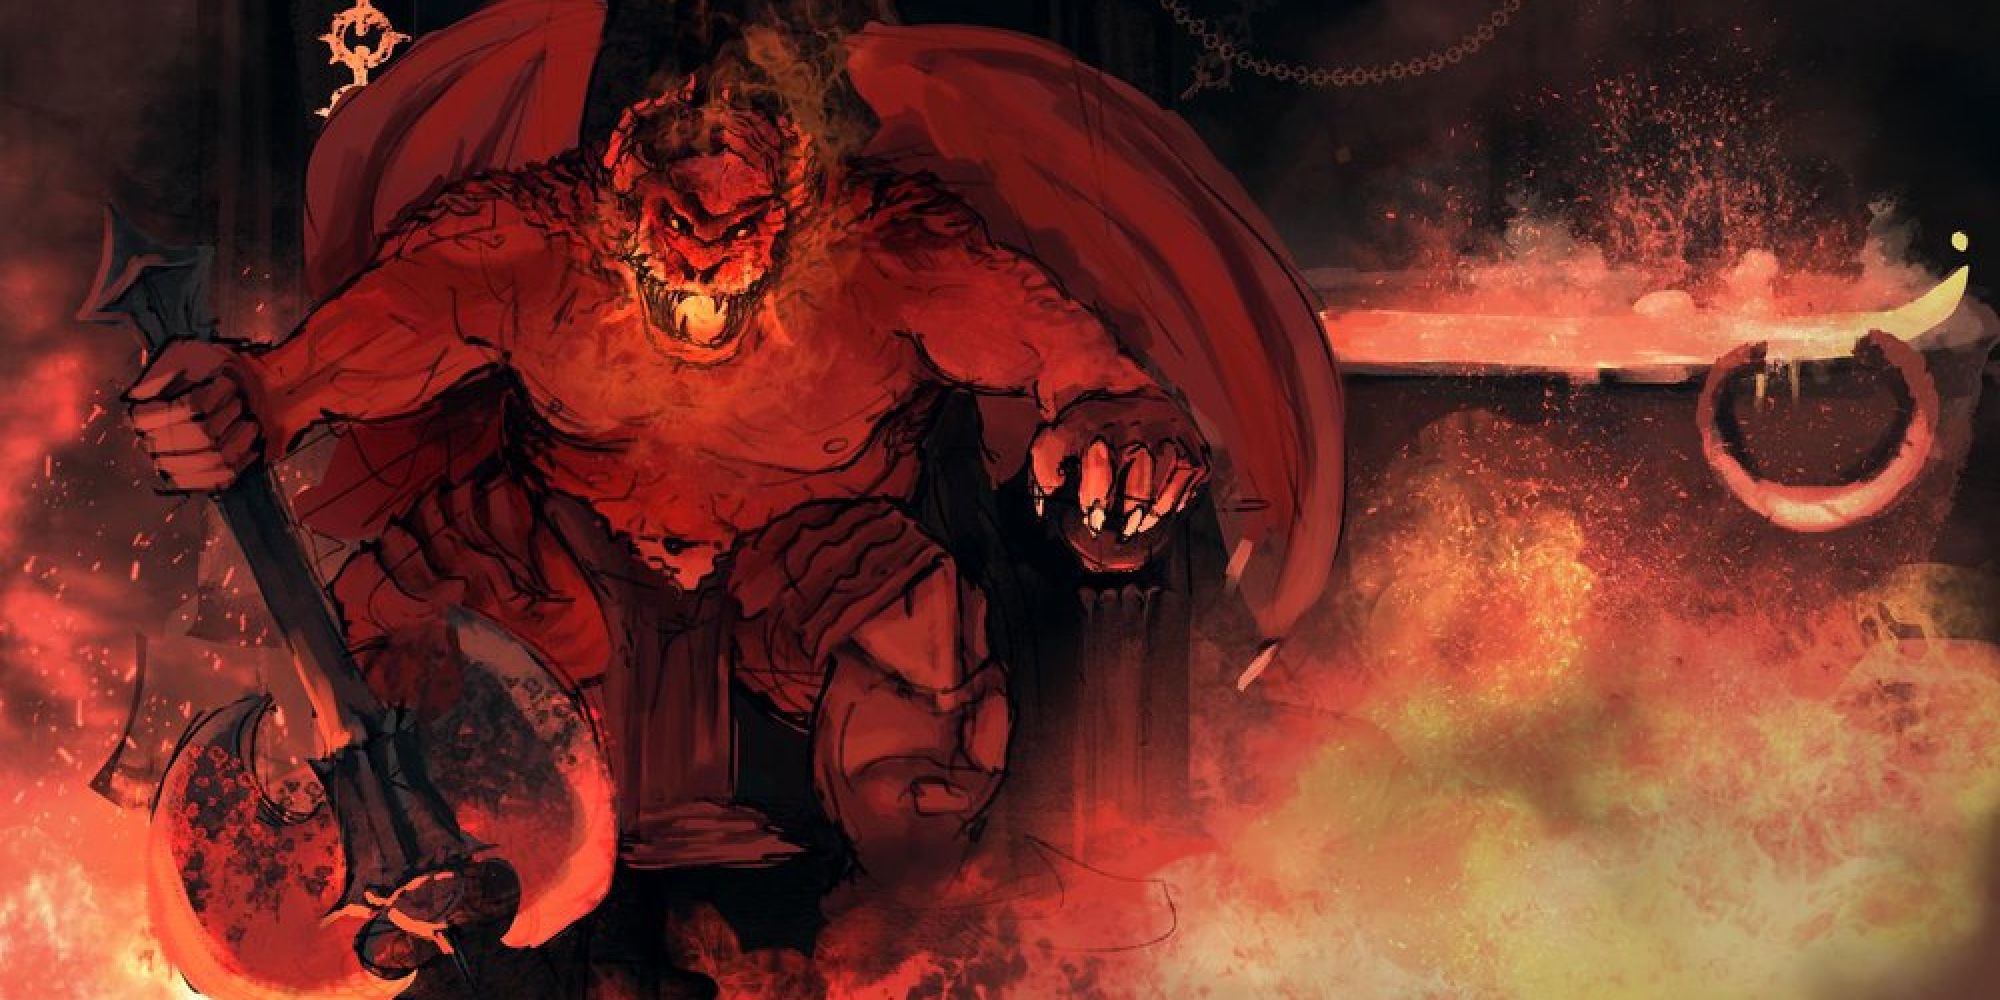 A powerful Pit Fiend seated on his hellish throne in an infernal background.